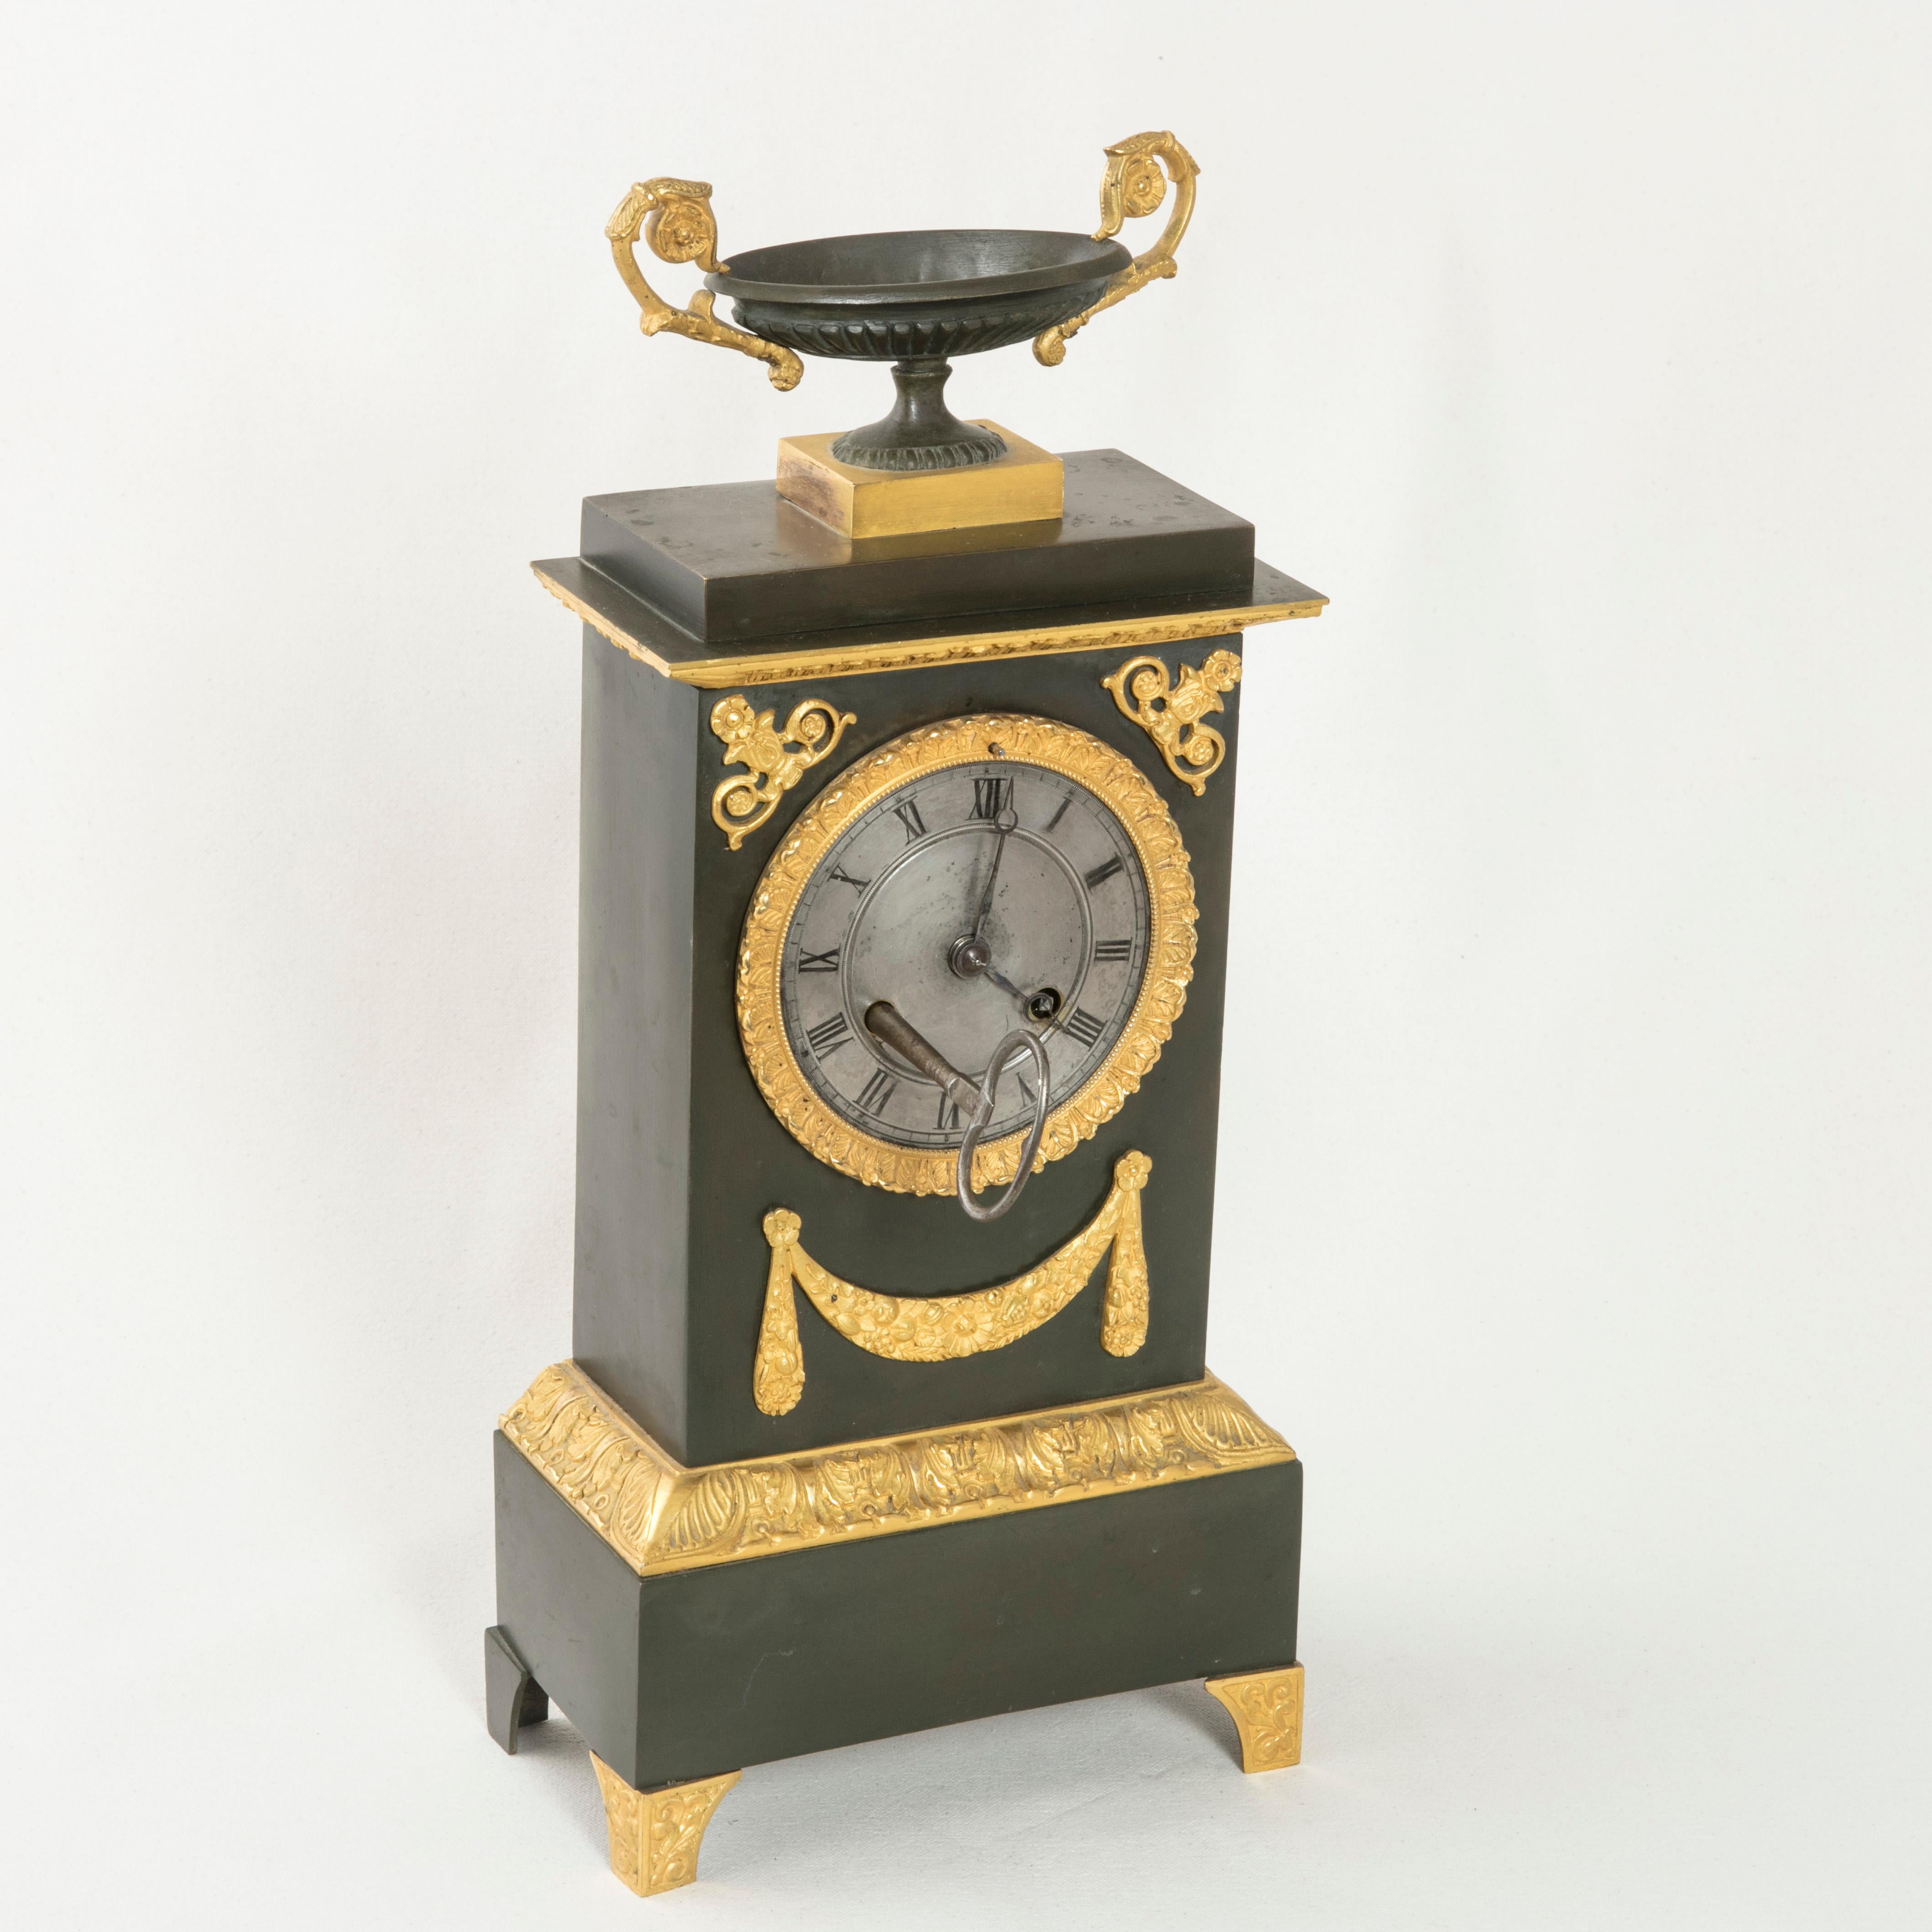 This early 19th century French Charles X period iron mantel (fireplace) clock features gilt bronze detailing of scrolling and a swag below the face. An iron urn with gilt bronze handles crowns the top and stands on a bronze plinth. Gilt bronze trim